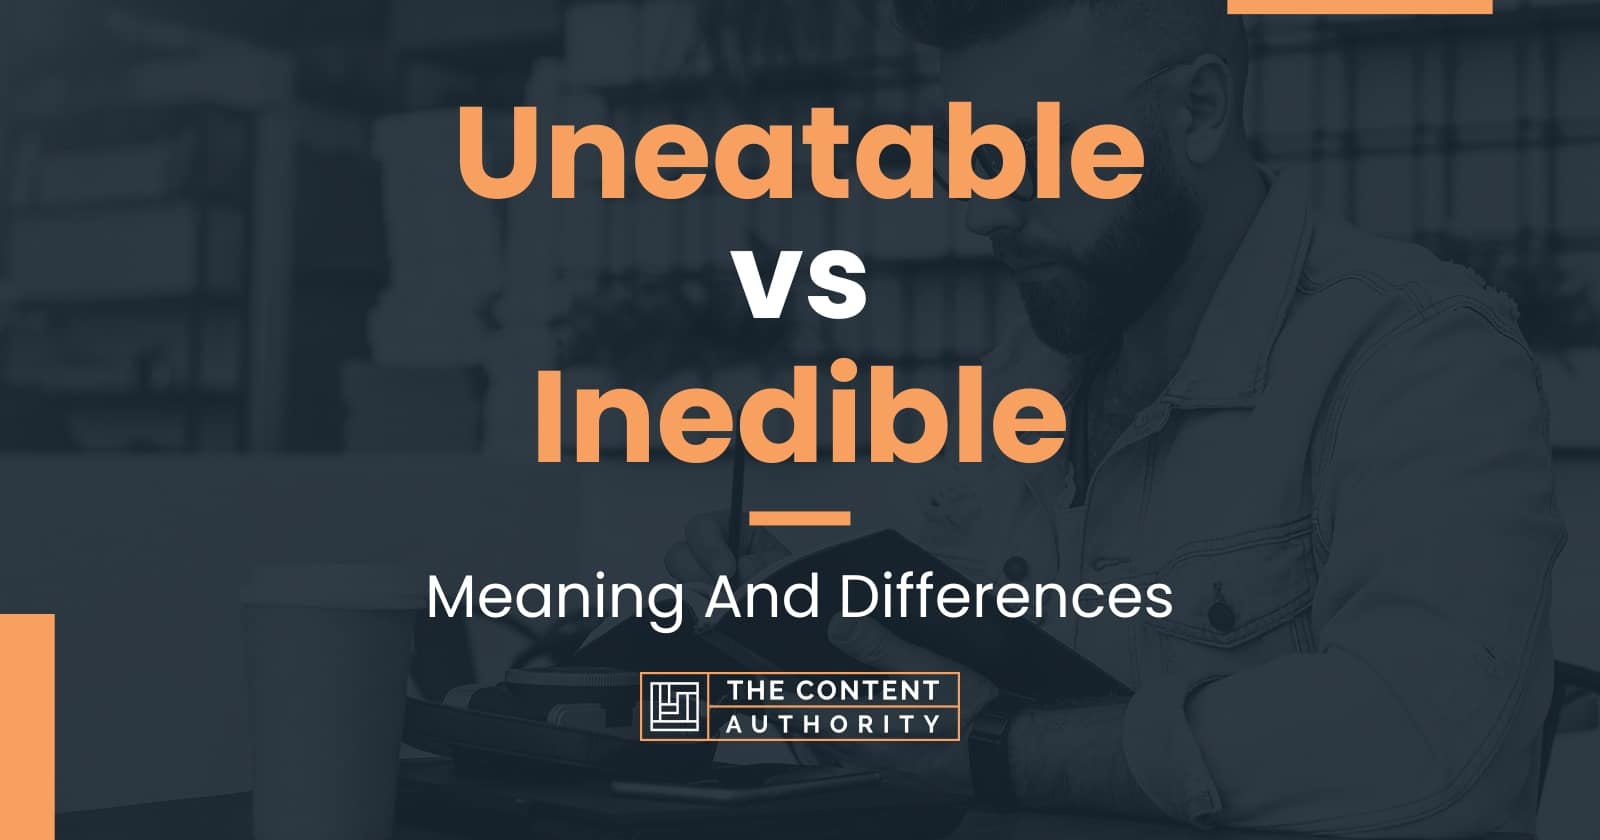 Uneatable vs Inedible Meaning And Differences